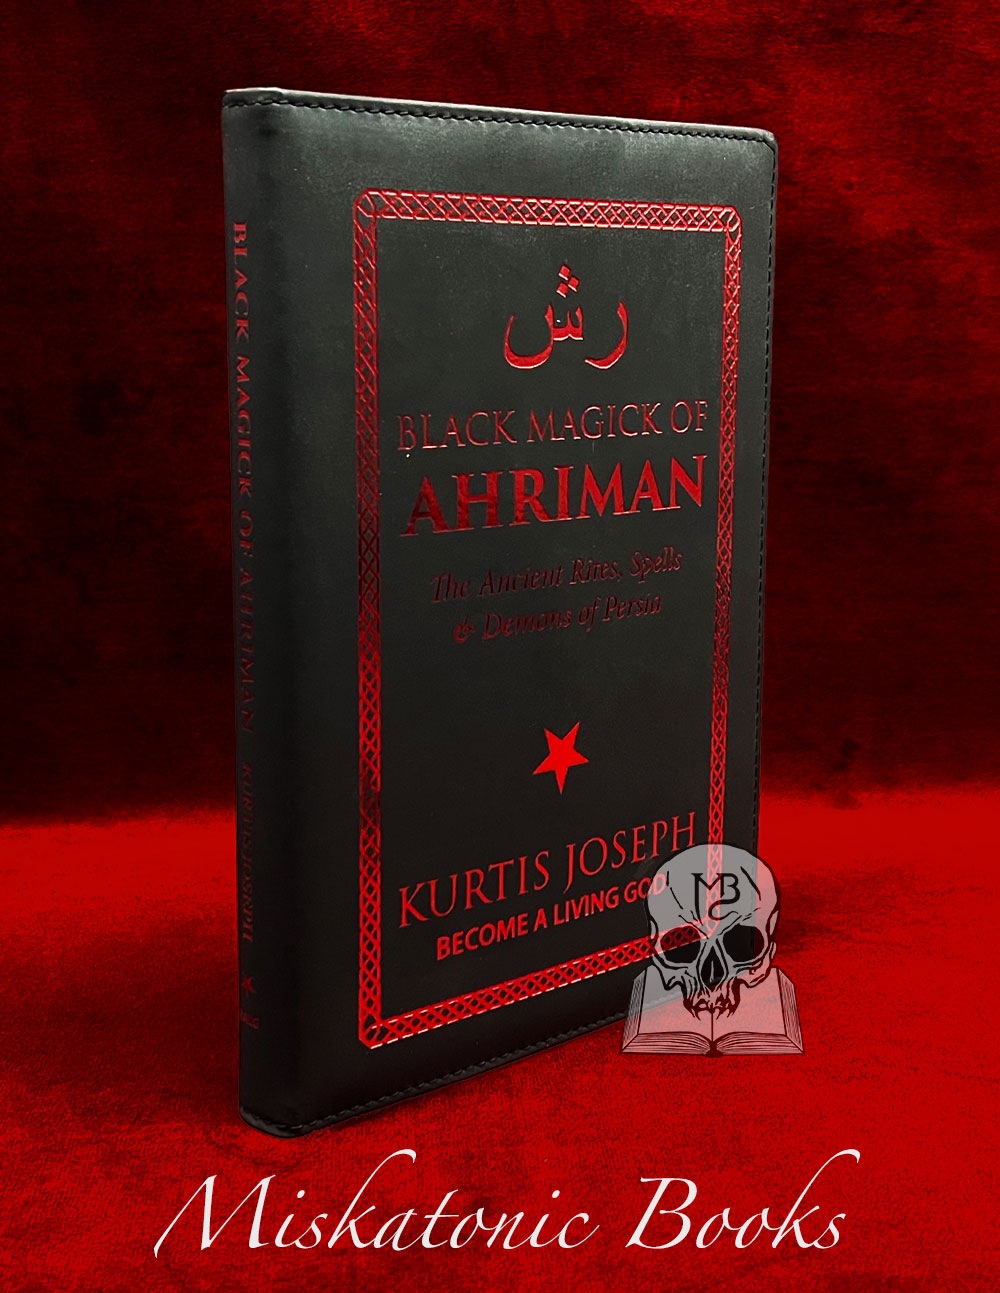 BLACK MAGICK OF AHRIMAN: The Ancient Rites, Spells & Demons of Persia by Kurtis Joseph - Deluxe Leather bound Edition